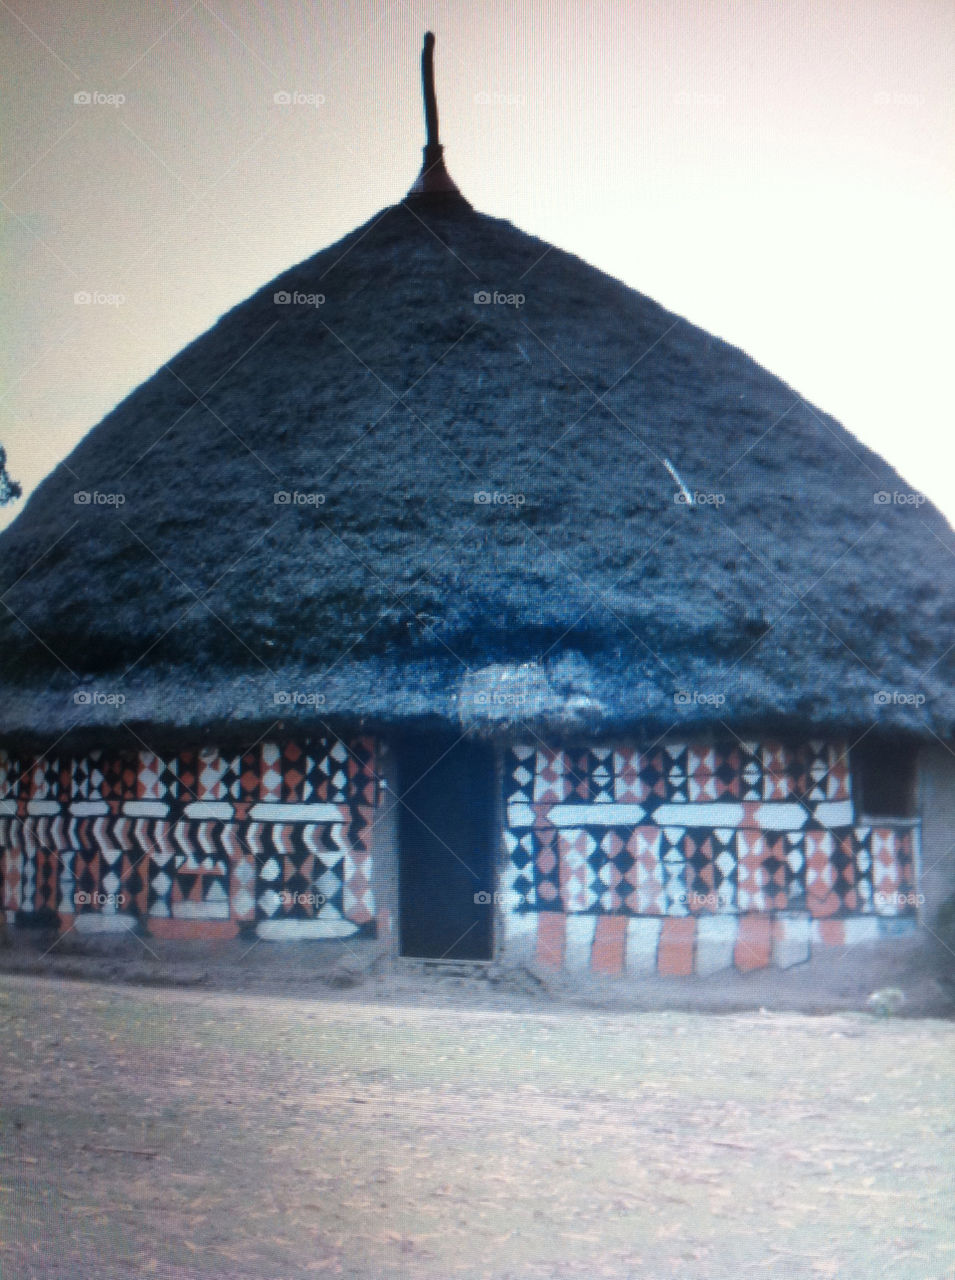 local house made of mud ethiopia africa by flybye